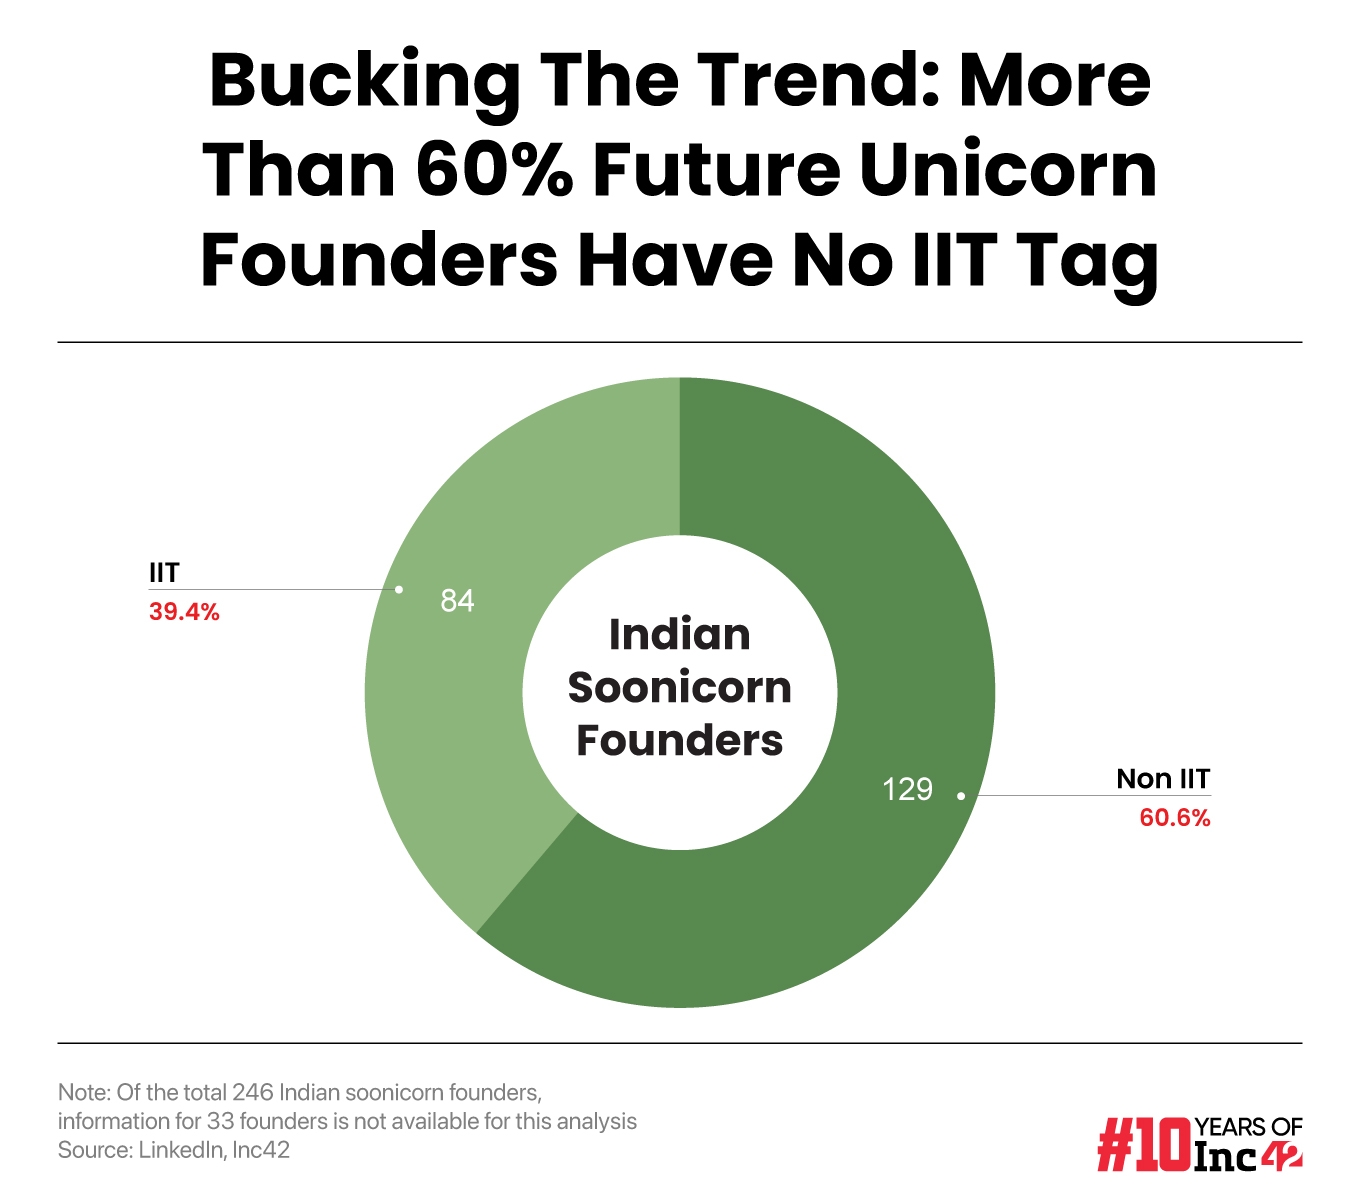 The fact that over 60% soonicorn founders come from a non-IIT background shows that despite a prestigious university degree being a plus for startup founders, it has not been a deciding factor for investors anymore.